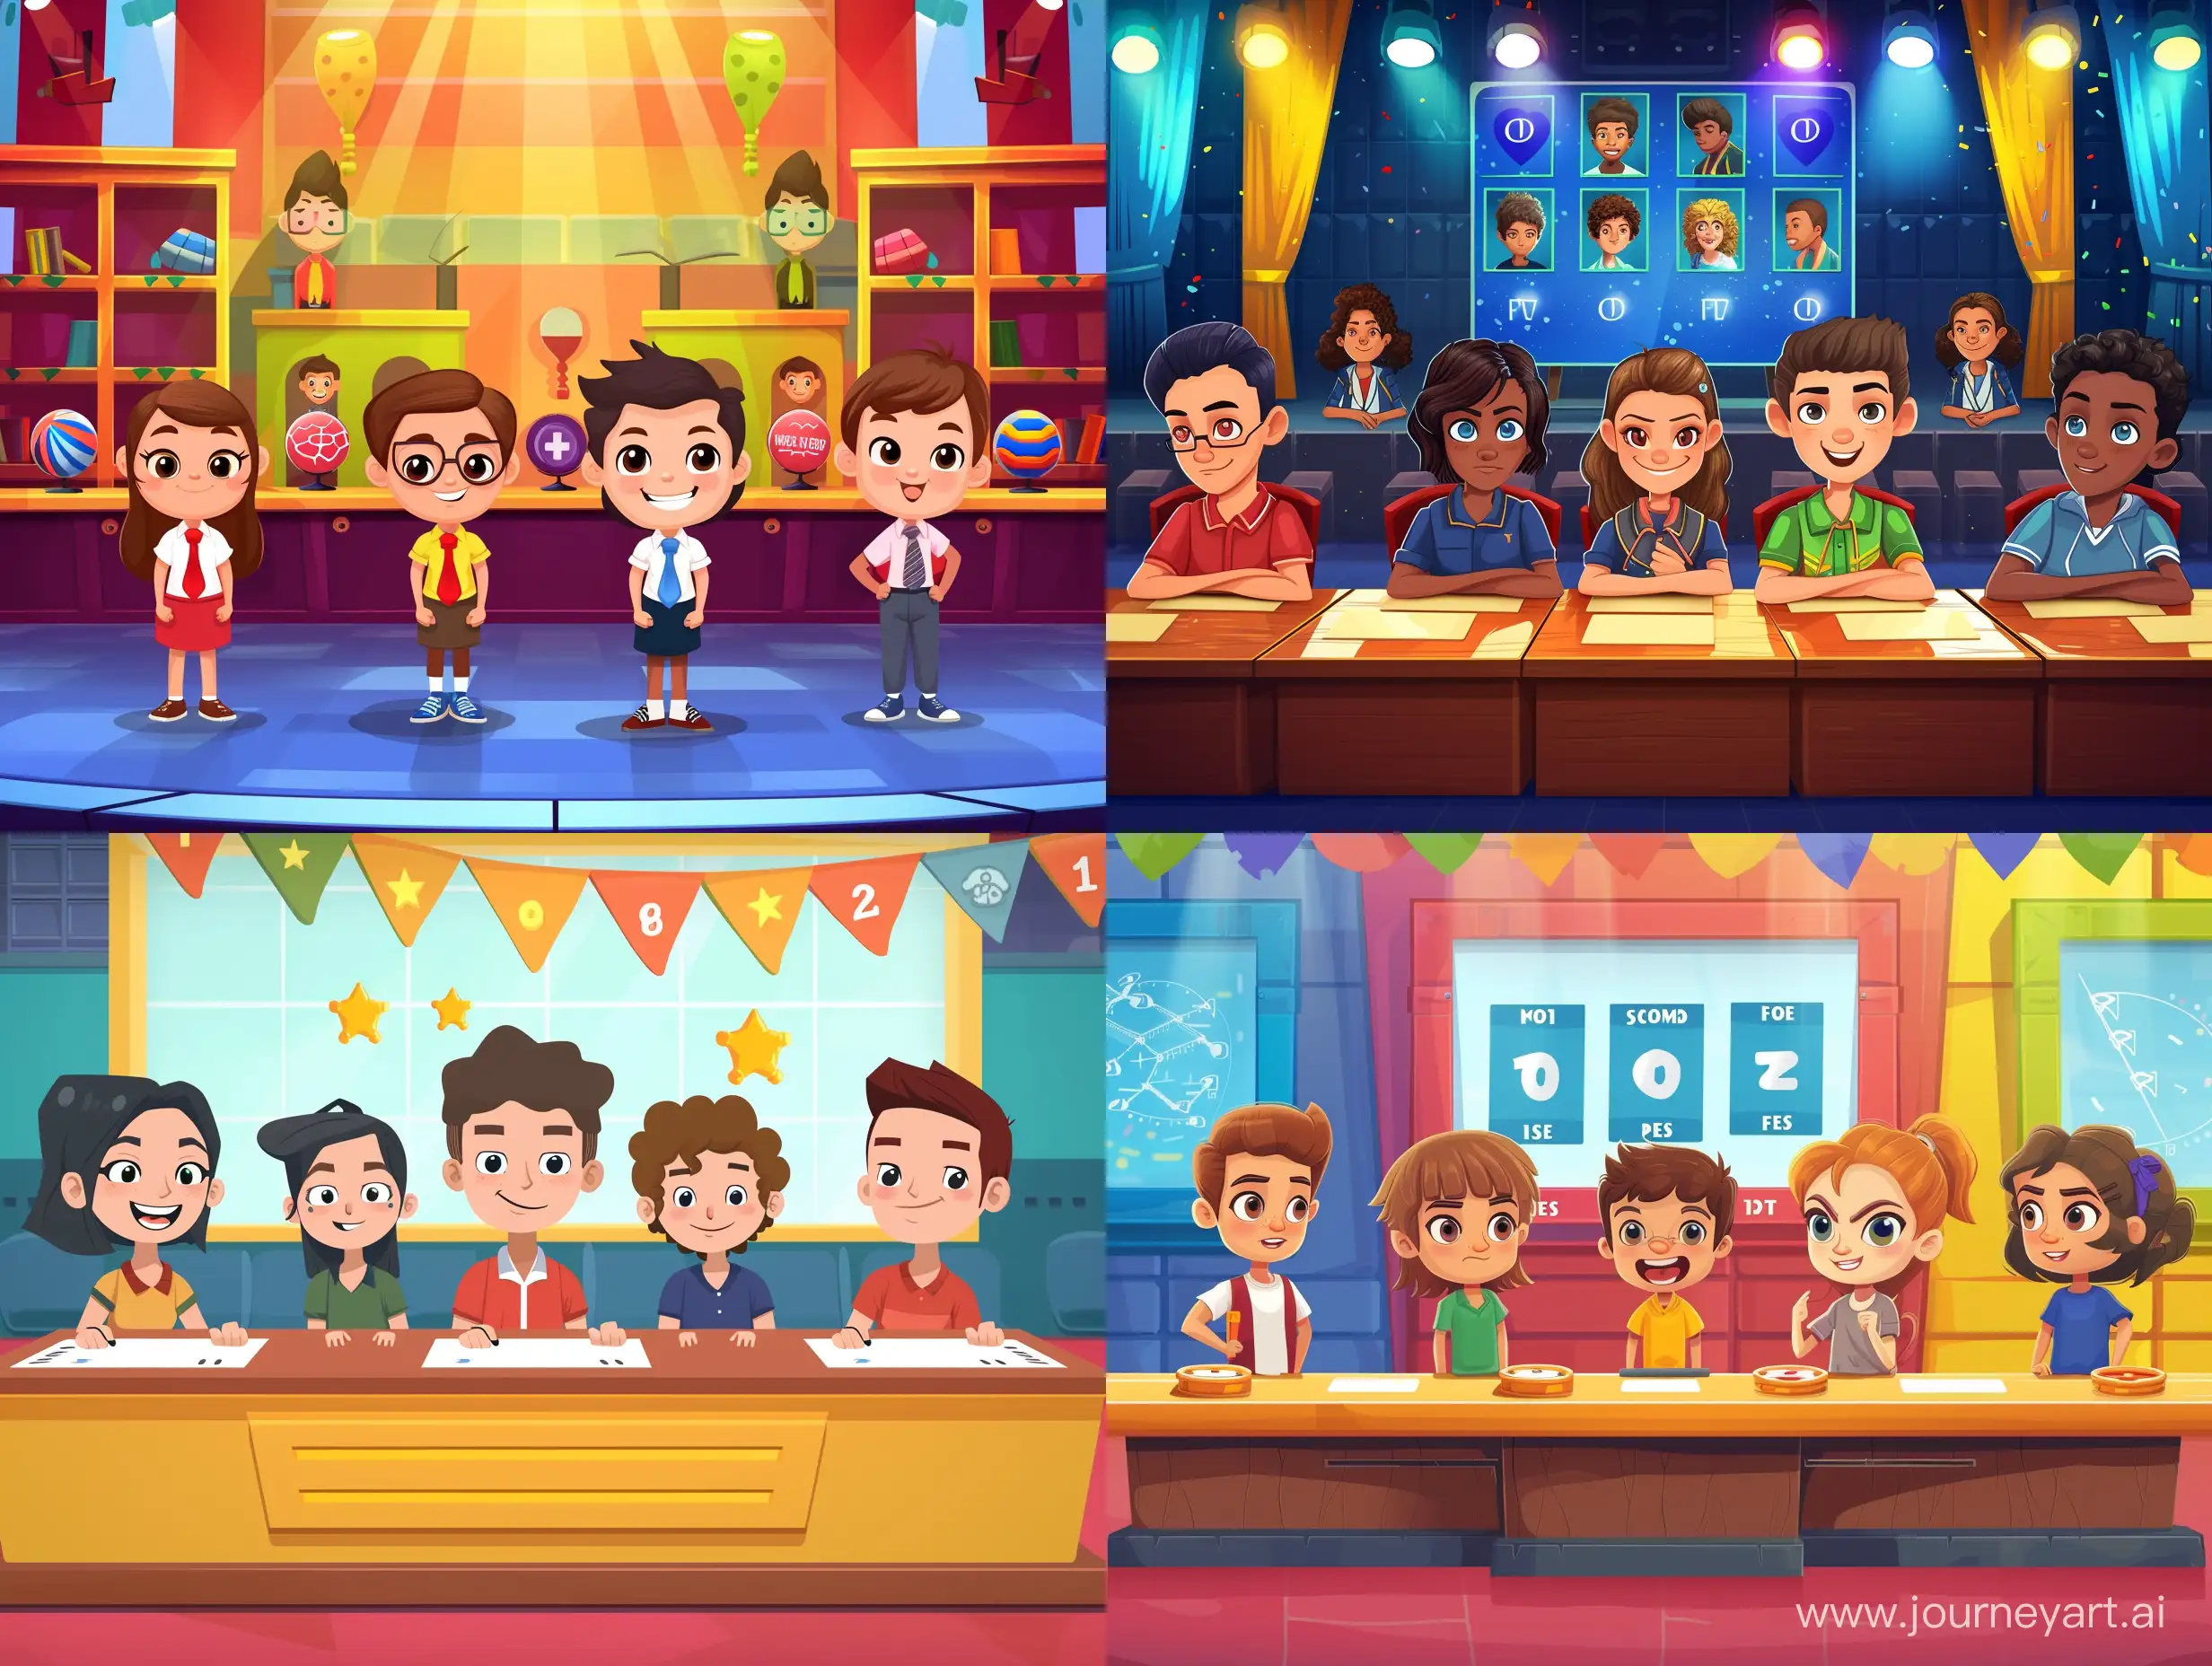 School  game show background for  with 3 teams, each with 3 students more animated background with different competitions